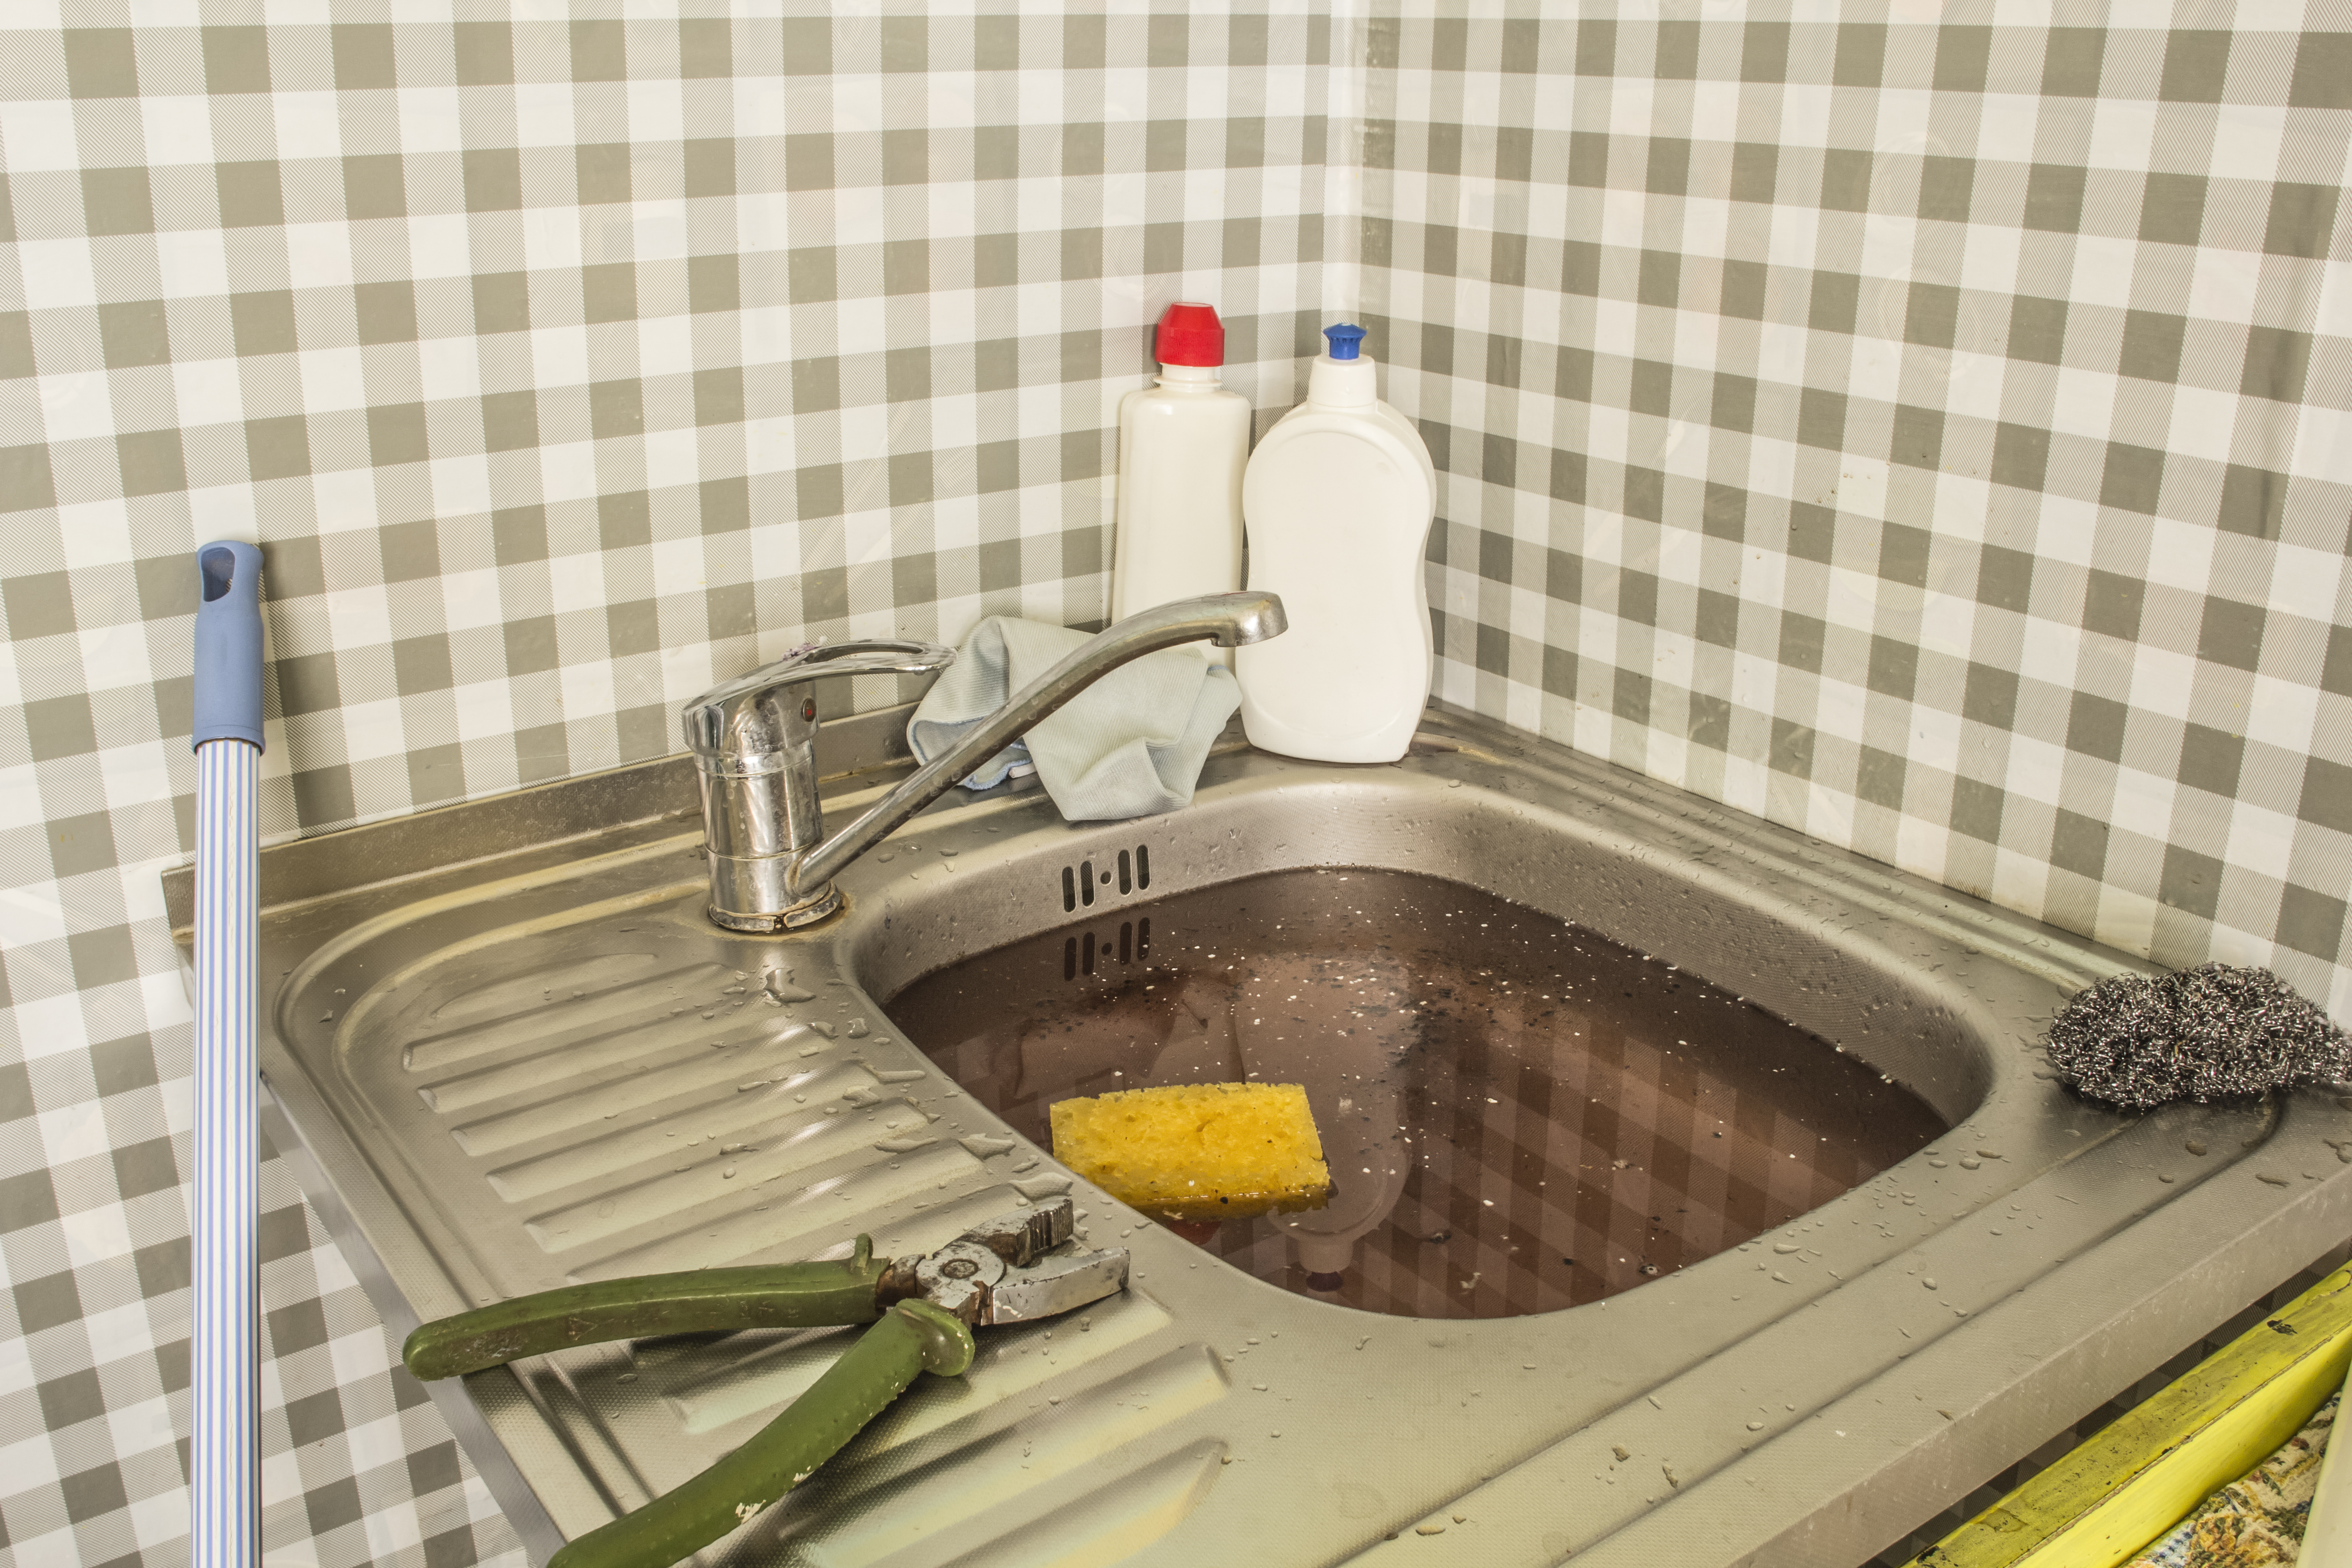 What Do Acid-Based Drain Cleaning Products Like Drano Actually Do?